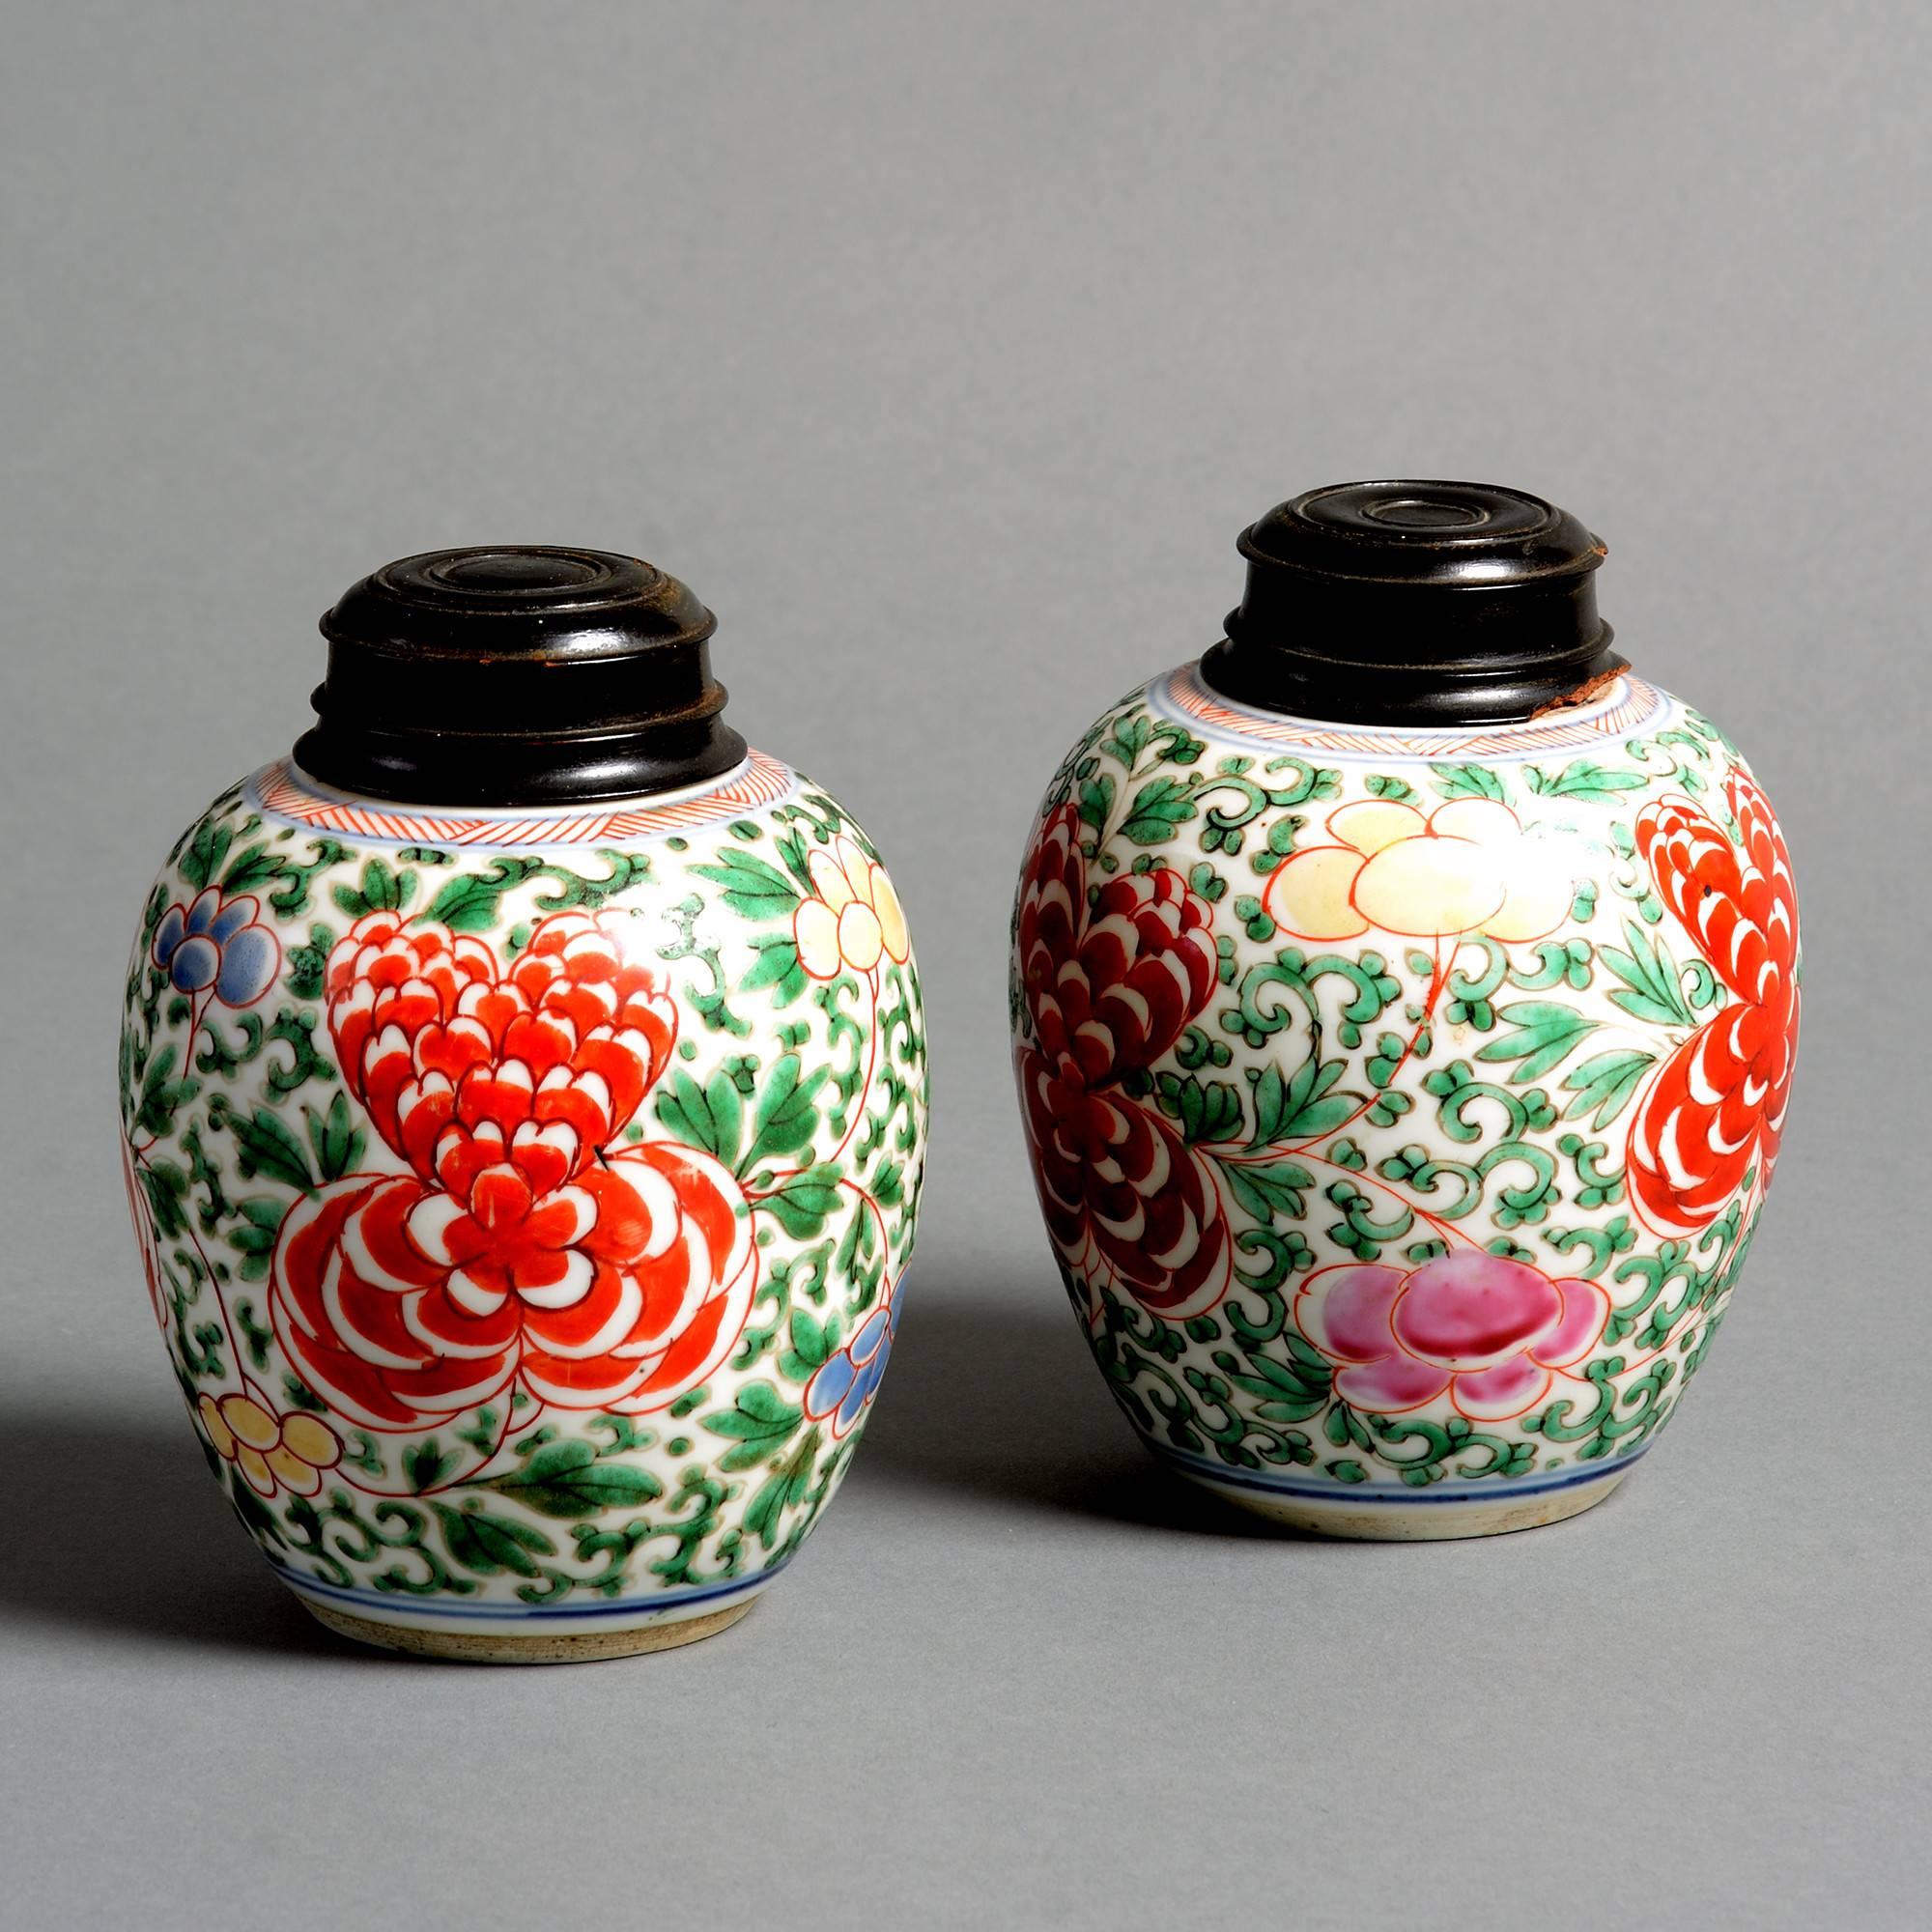 A pair of small-scale Kangxi period Wucai porcelain jars, decorated with floral and foliate motifs. 

Later wooden lids (one slightly damaged). 

P. 8.